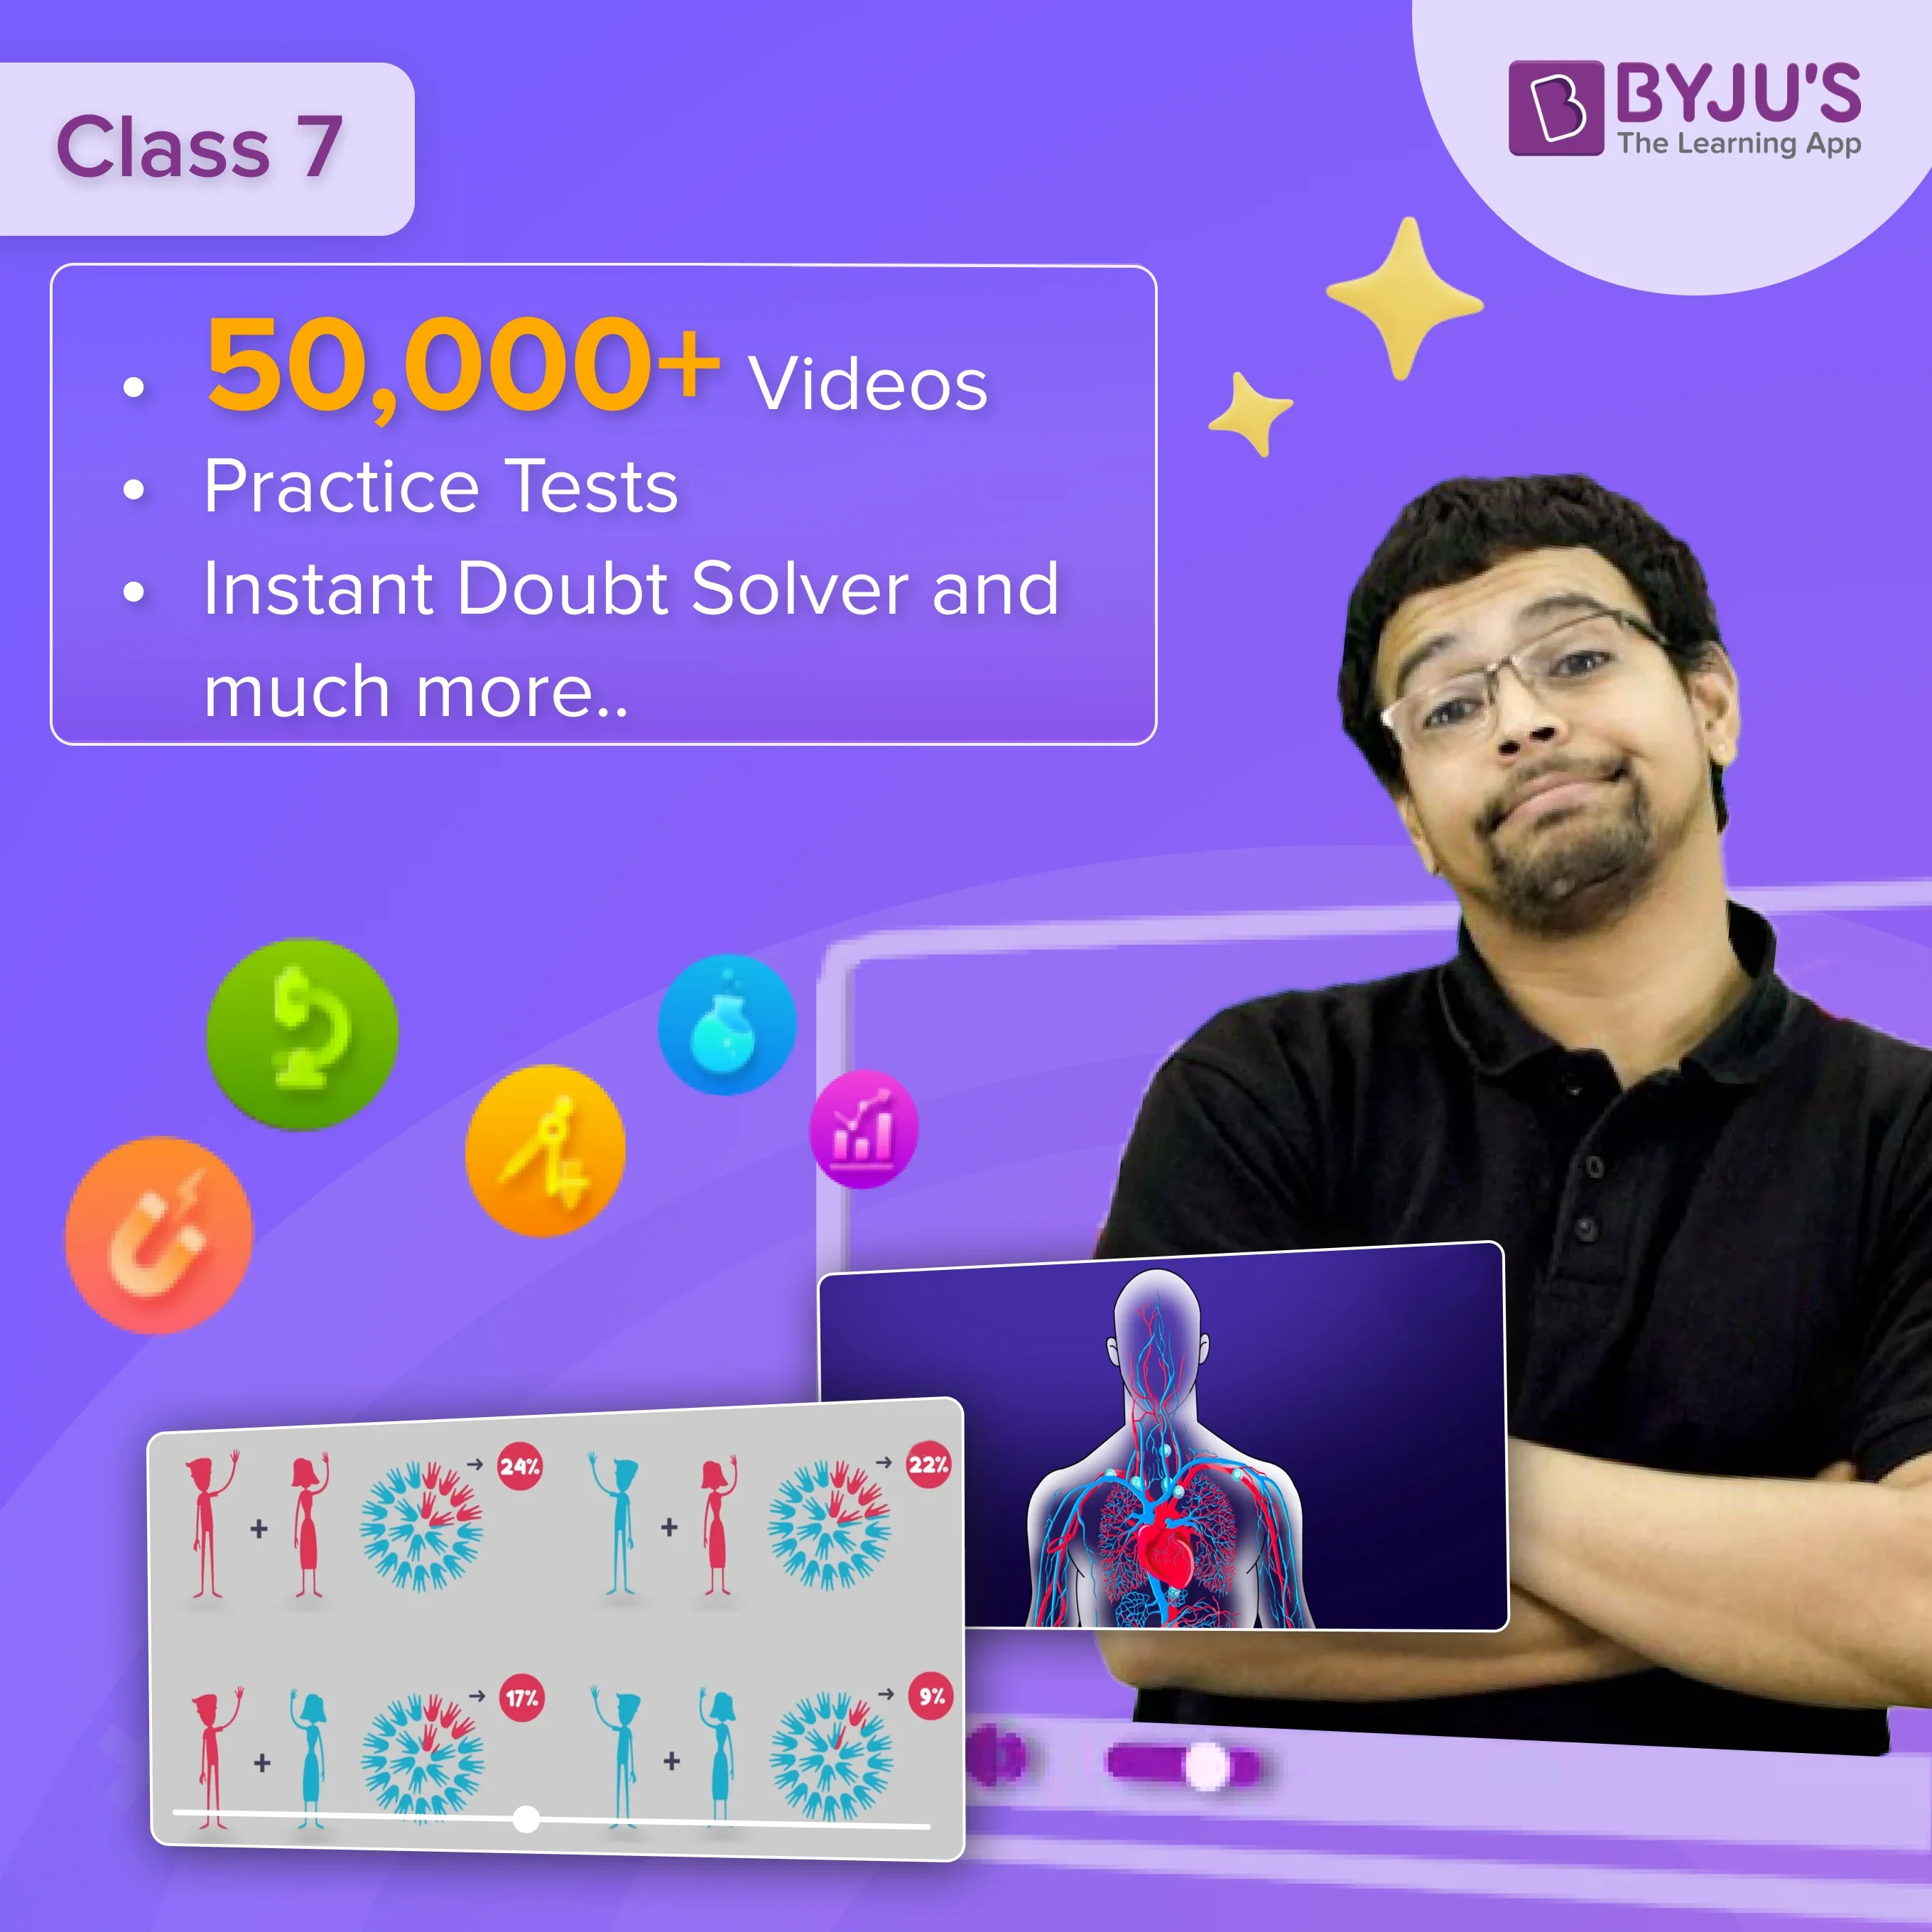 BYJU’S The Learning App - Class 7 (Renewal)